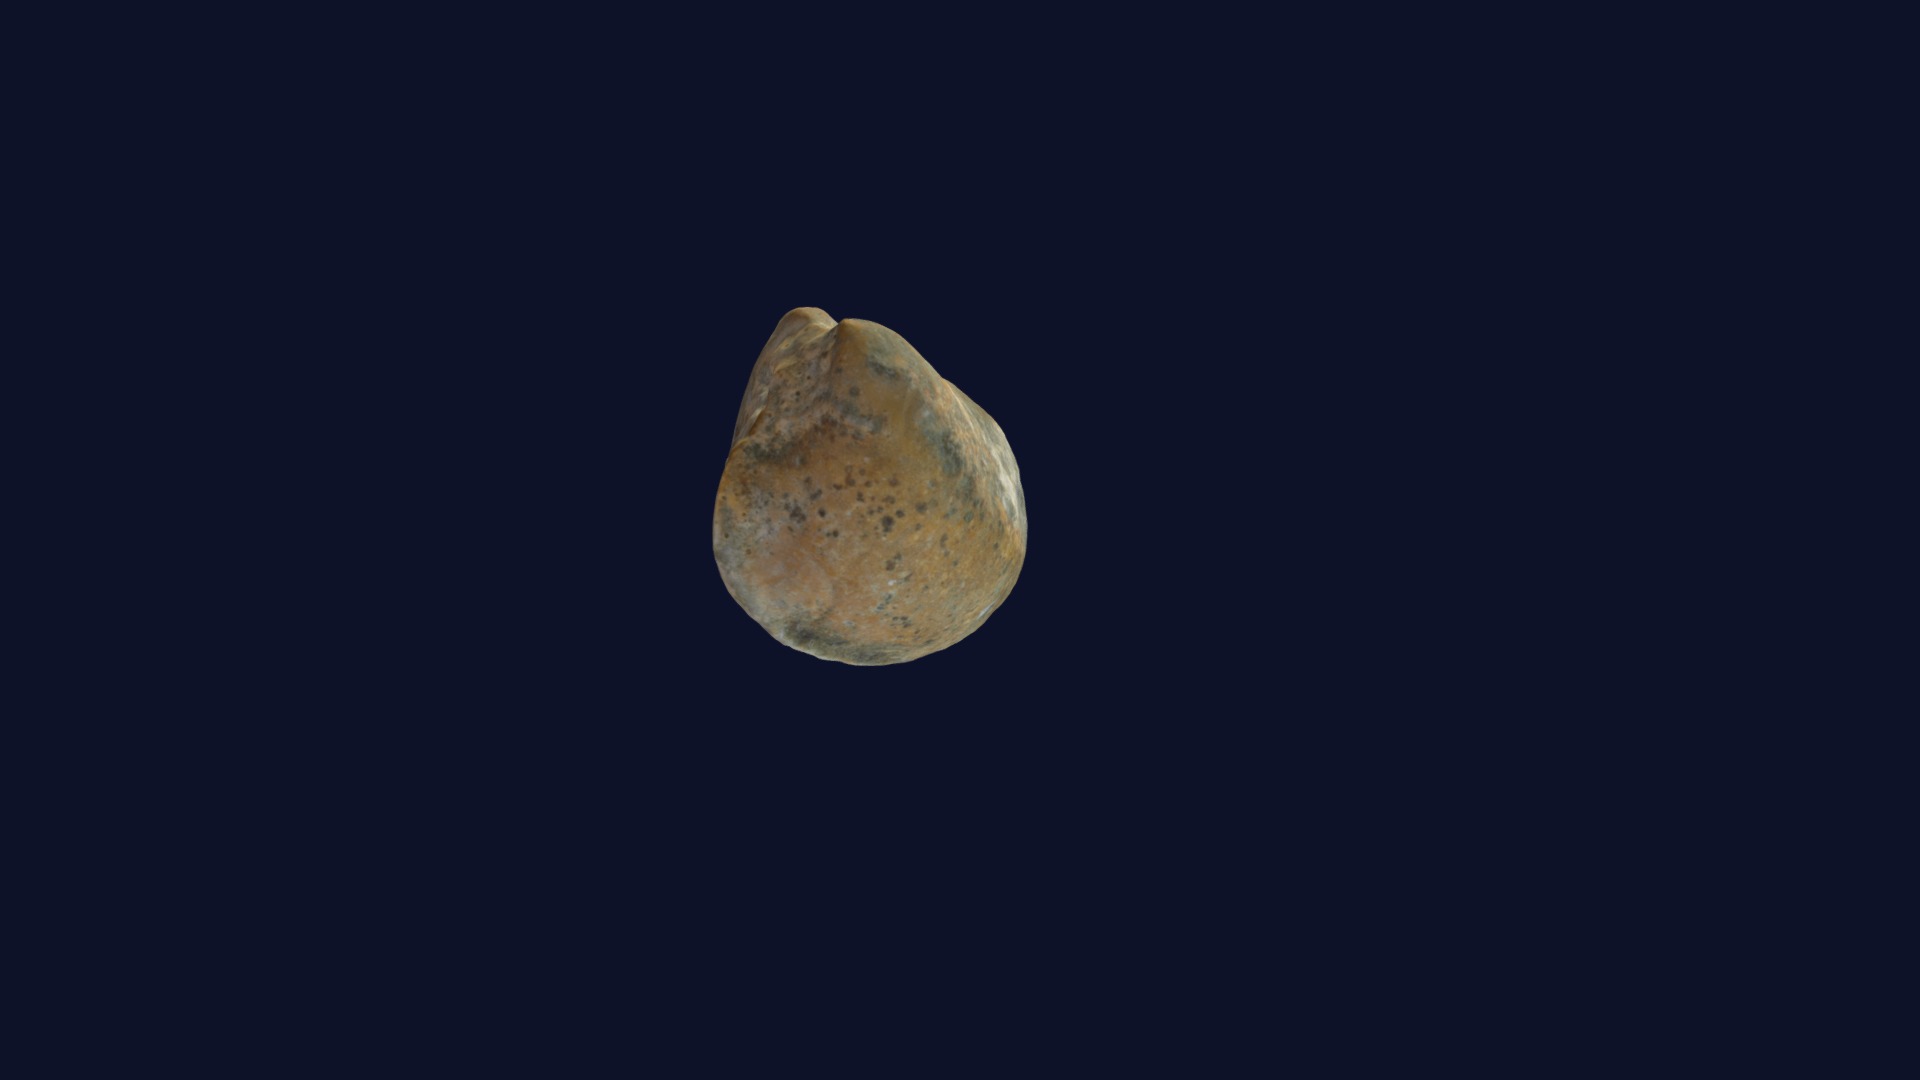 3D model Protocardia nutans - This is a 3D model of the Protocardia nutans. The 3D model is about a moon in the sky.